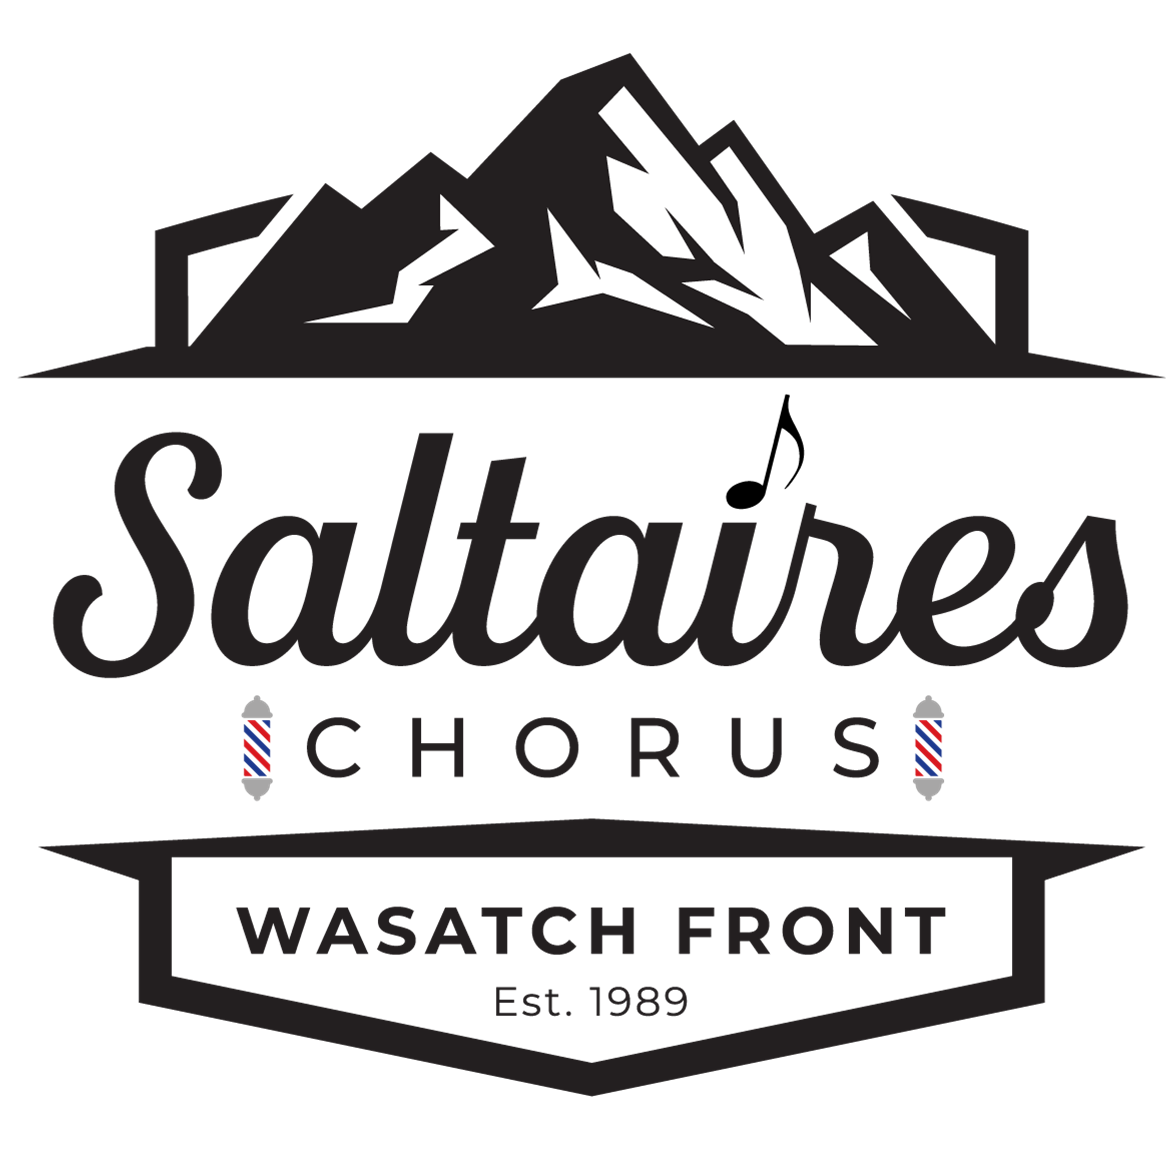 The Saltaires Chorus